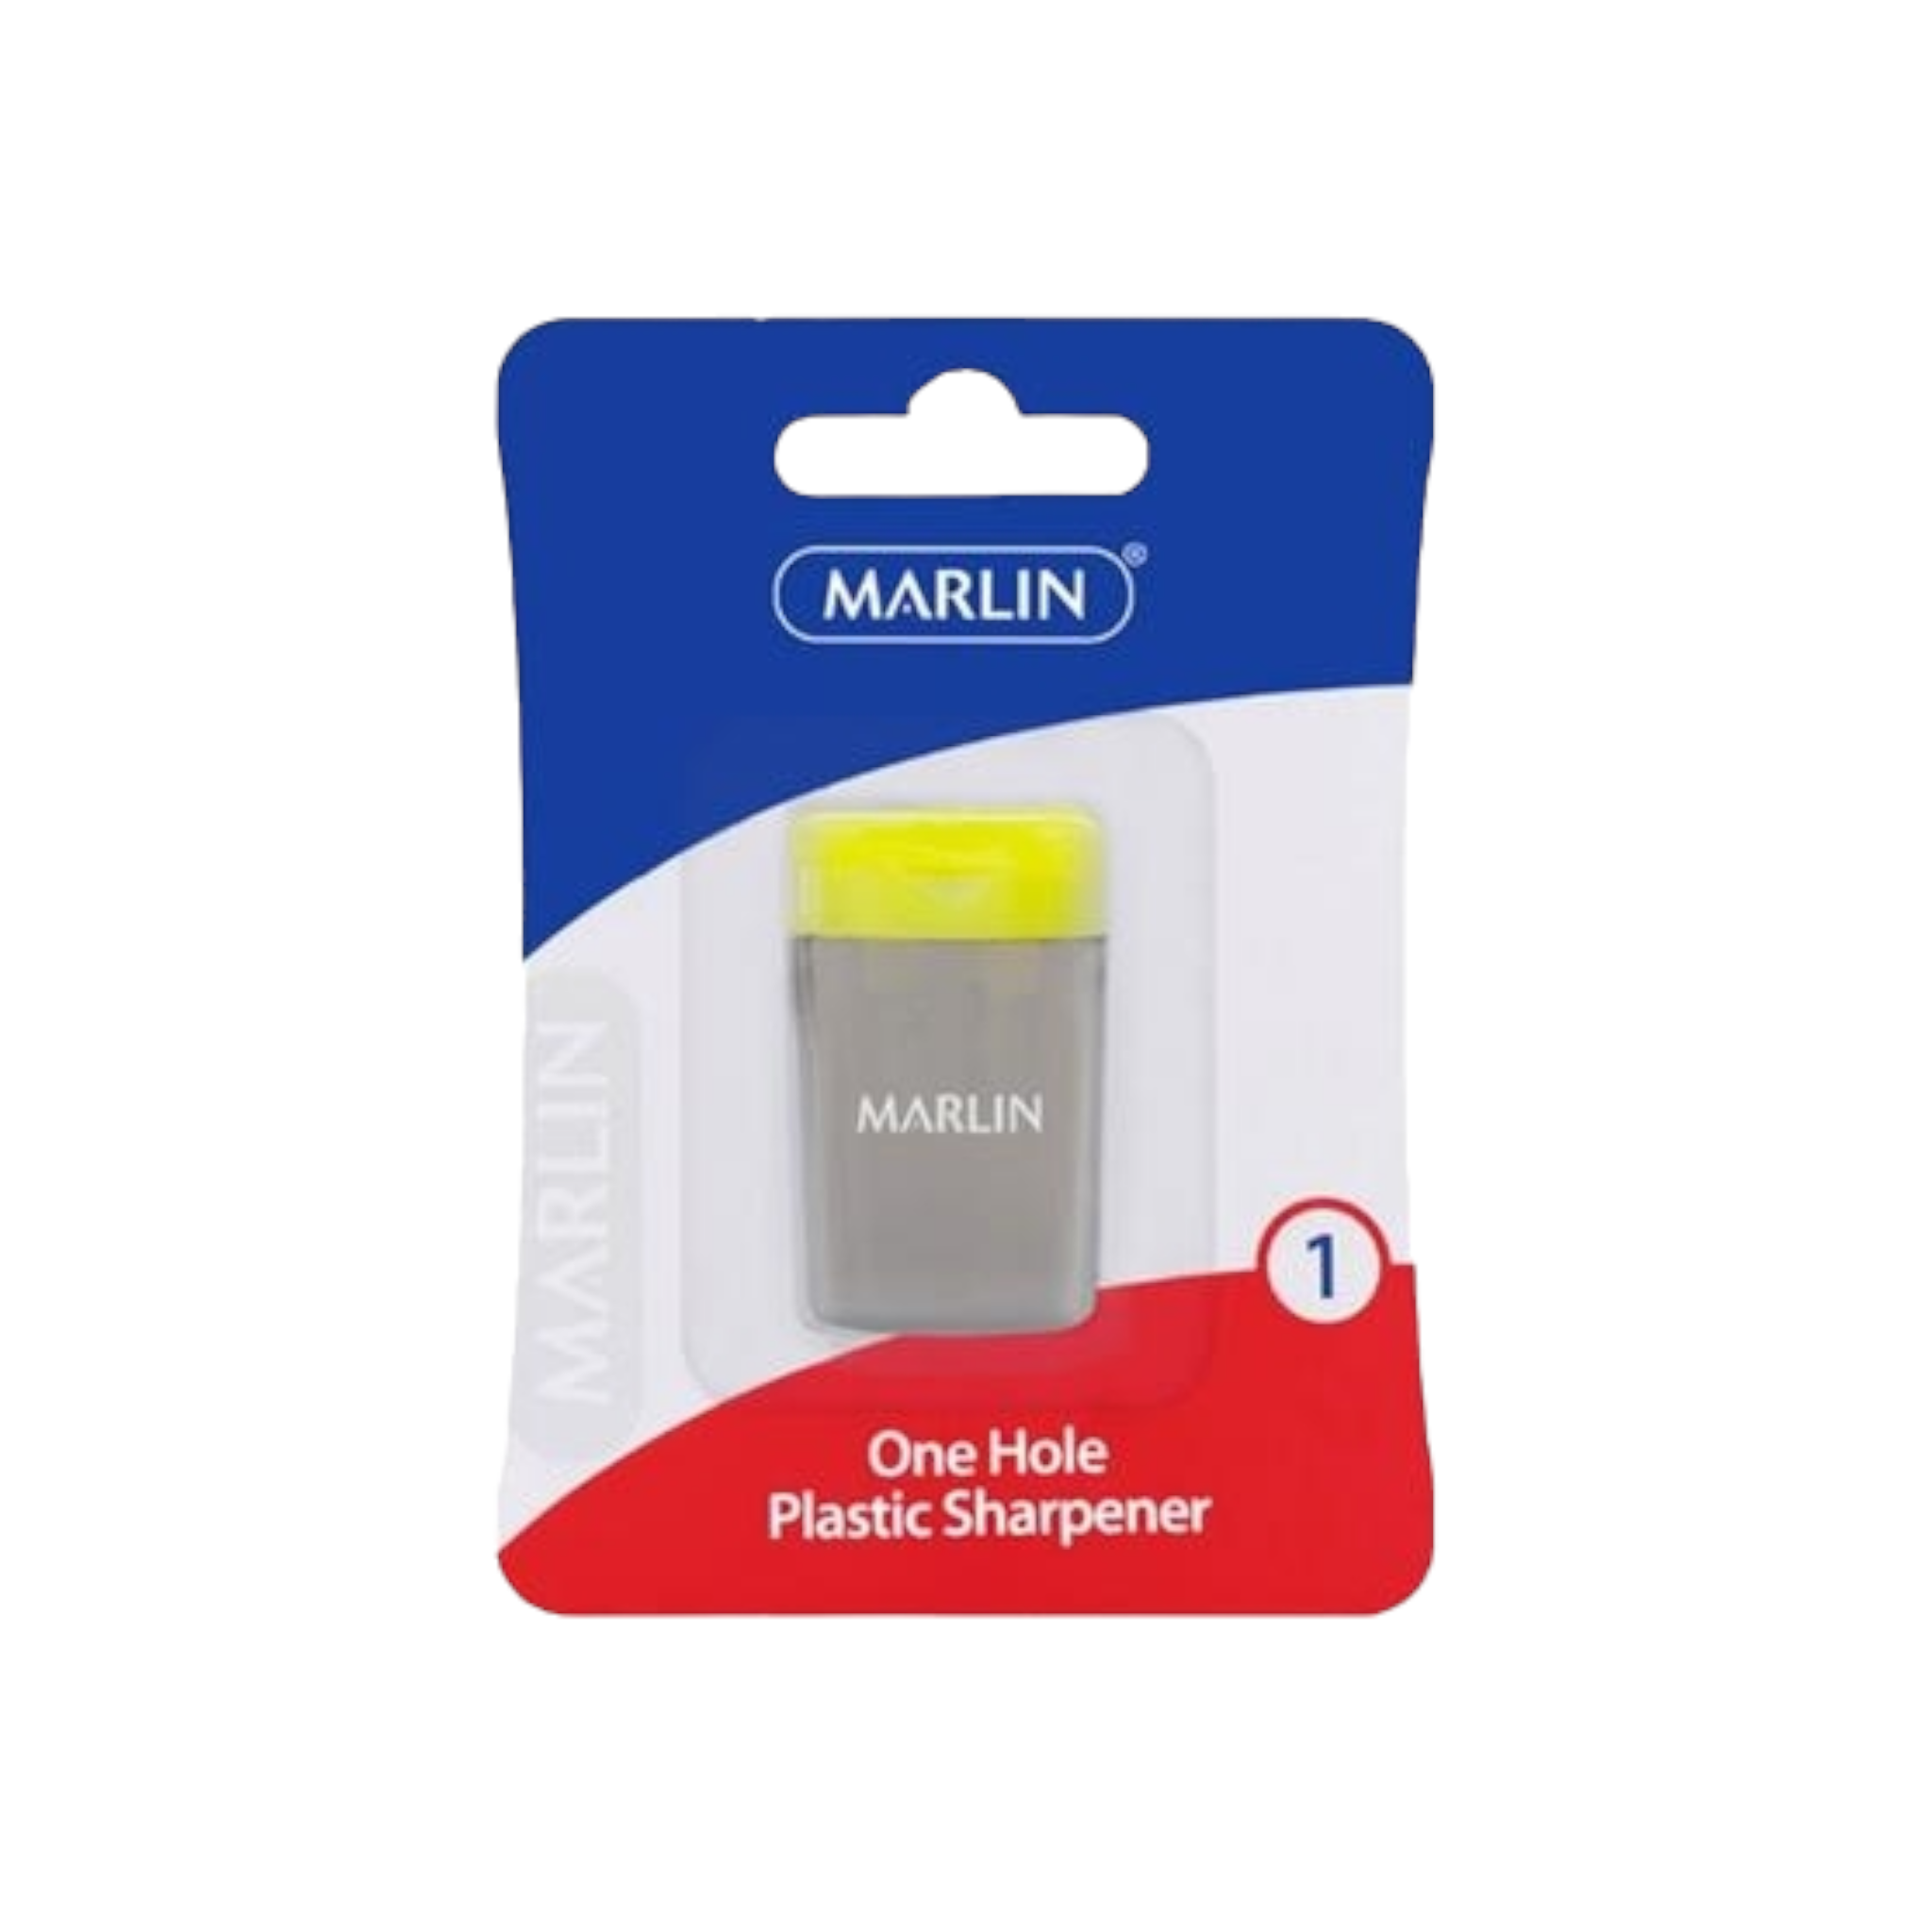 Marlin 1-Hole Plastic Sharpener with Waste Shavings Container